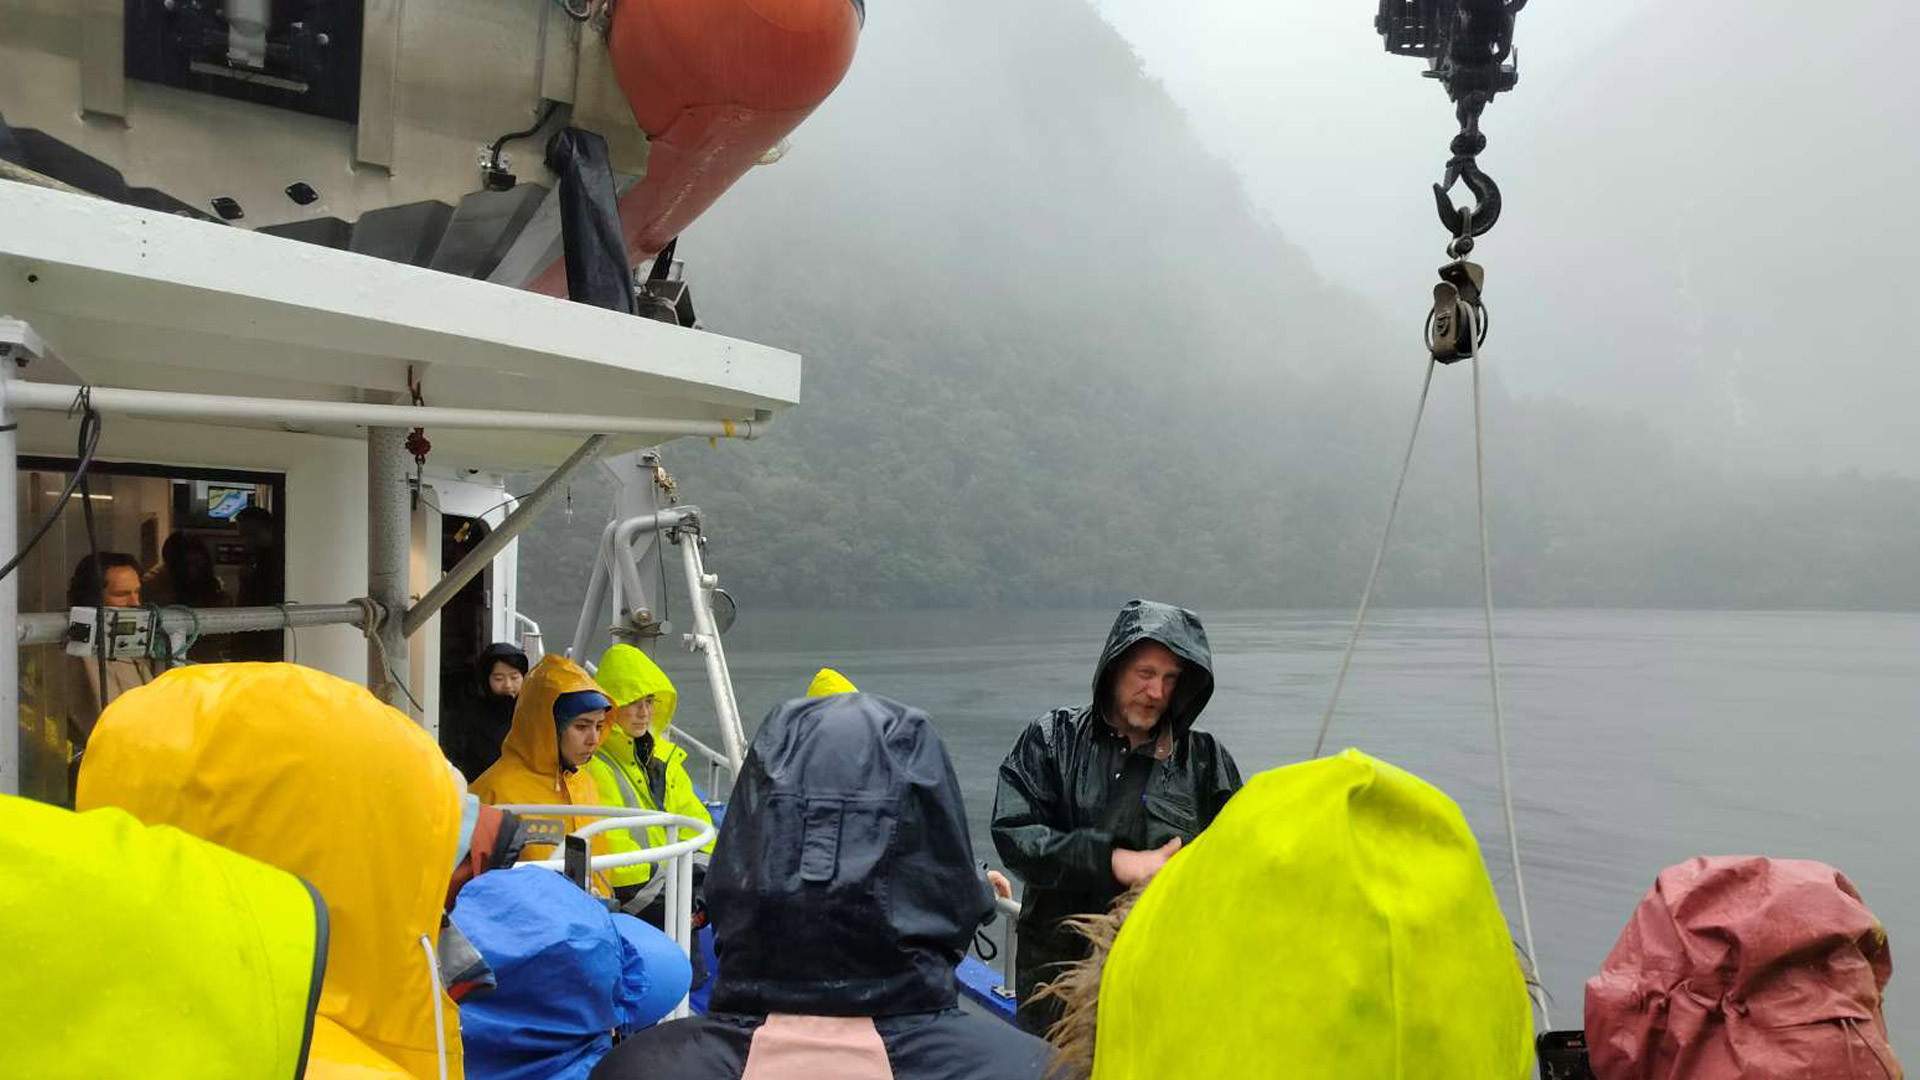 An image of our Winds of Change participants aboard a boat in DOubtful Sound on a very misty day